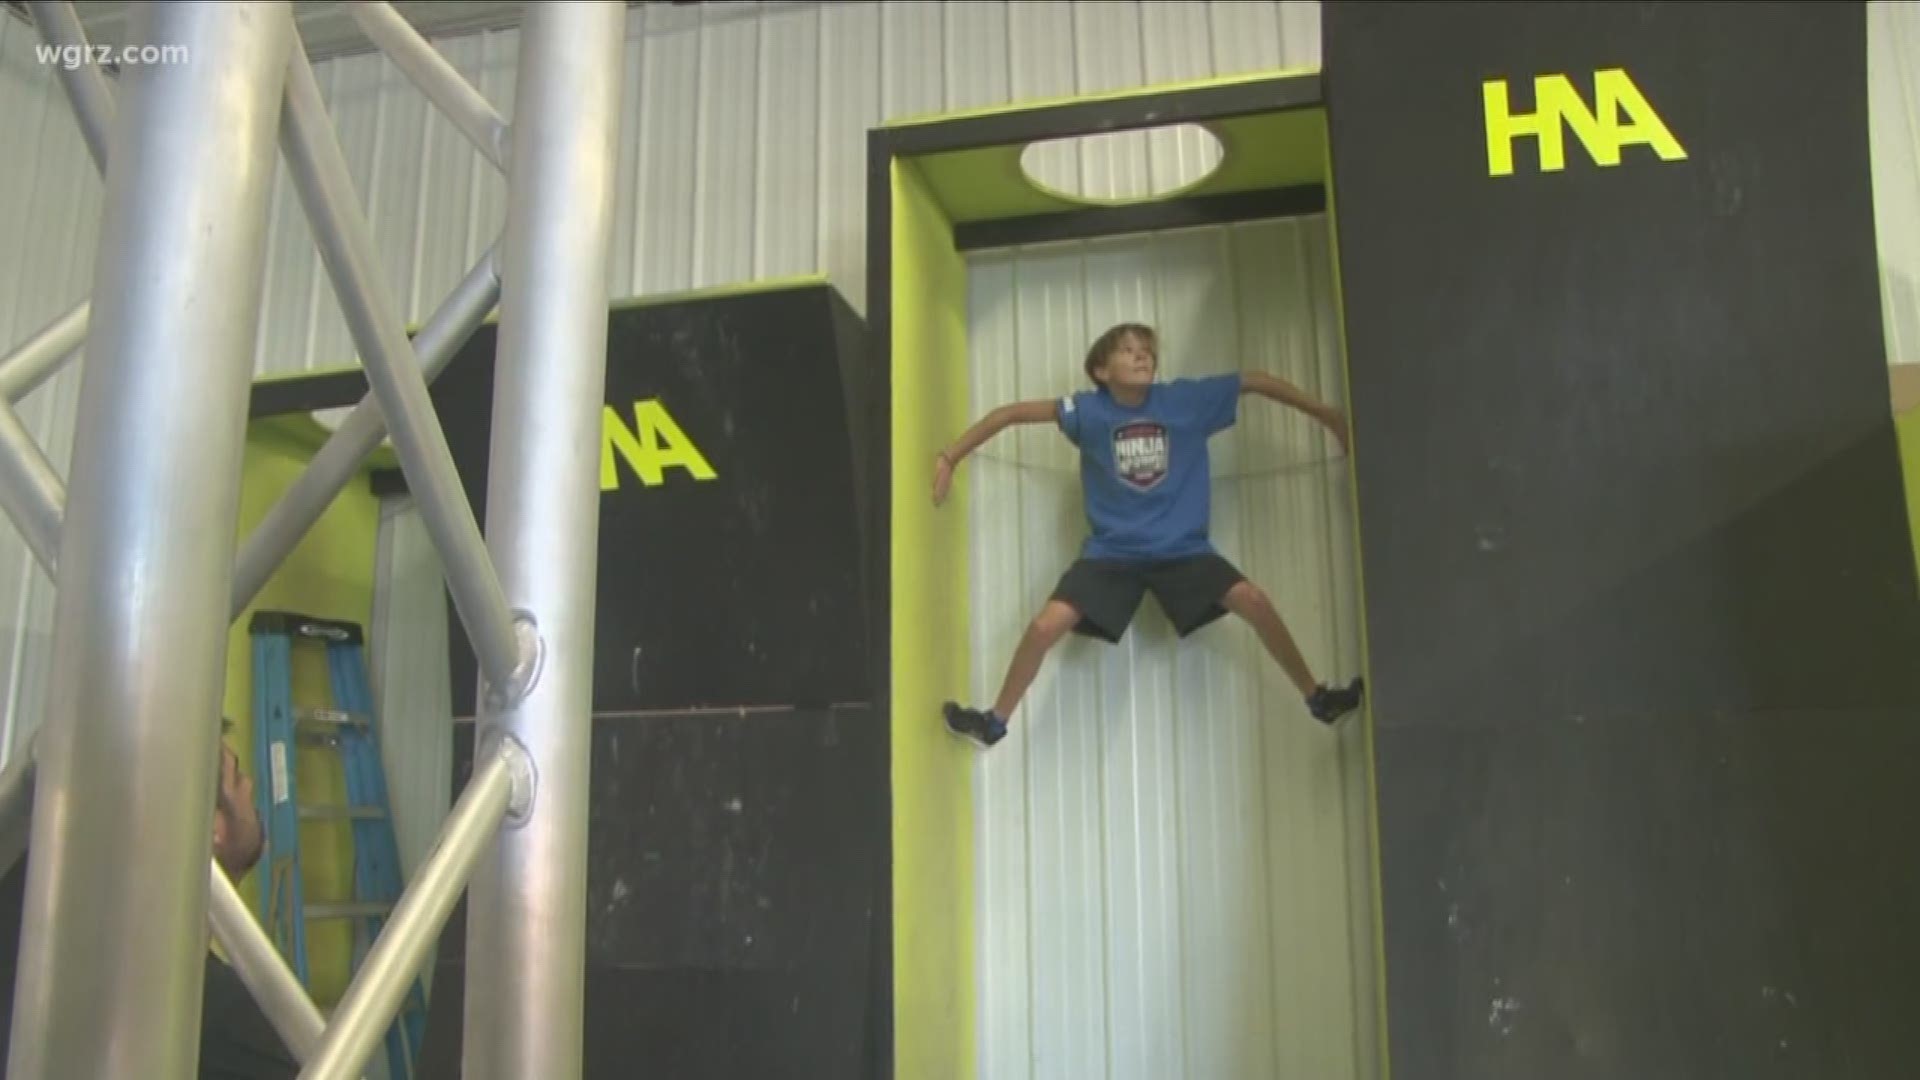 11-year-old Charlie Kowalski, a 7th grade student at St. John the Baptist school in Kenmore, was selected to compete on "American Ninja Warrior Junior." It debuts Saturday, October 13th, at 7pm on Universal Kids Network.